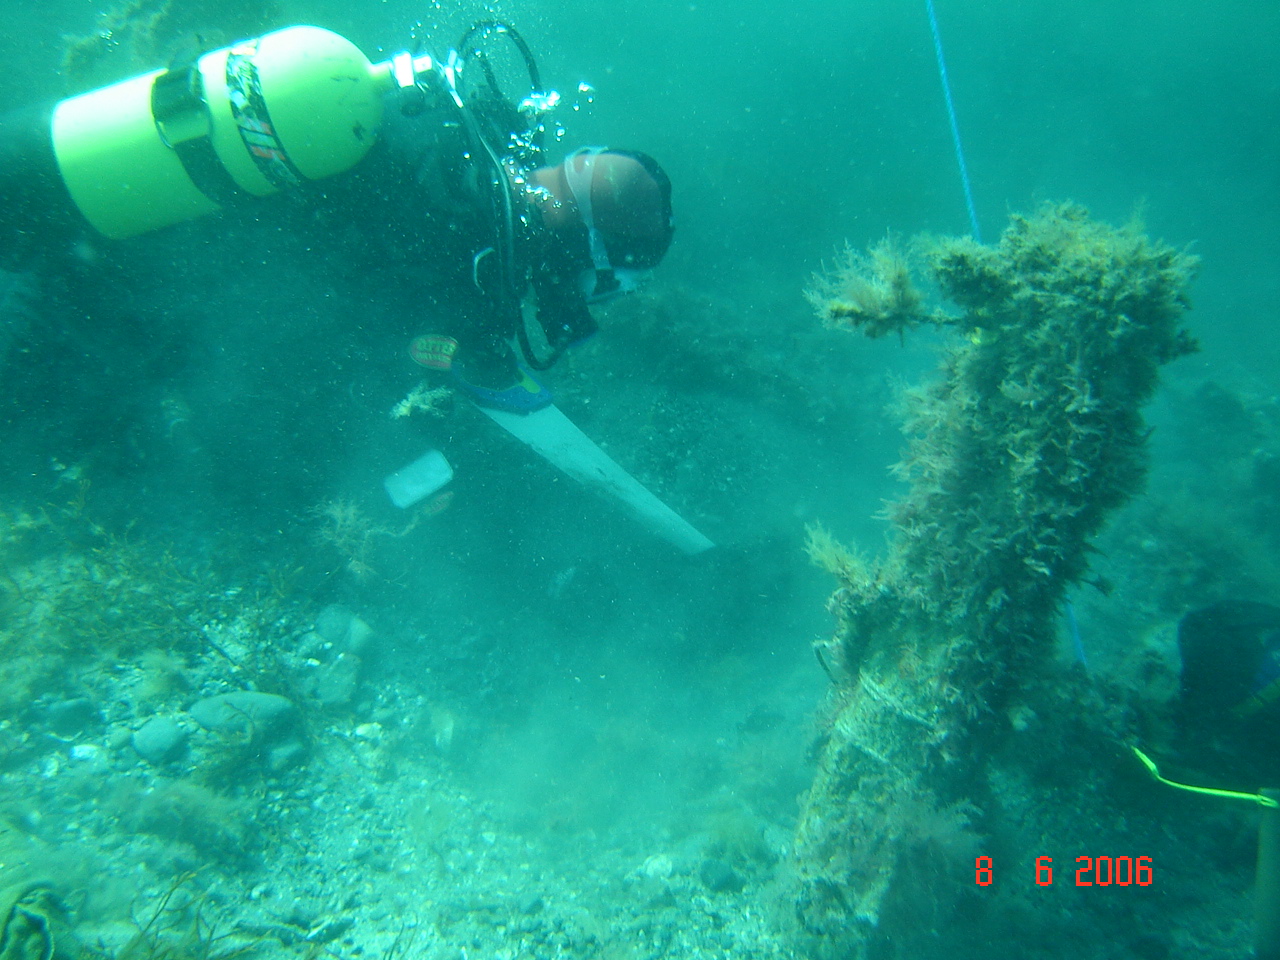  Timber samples being recovered for dendrochronological analysis   